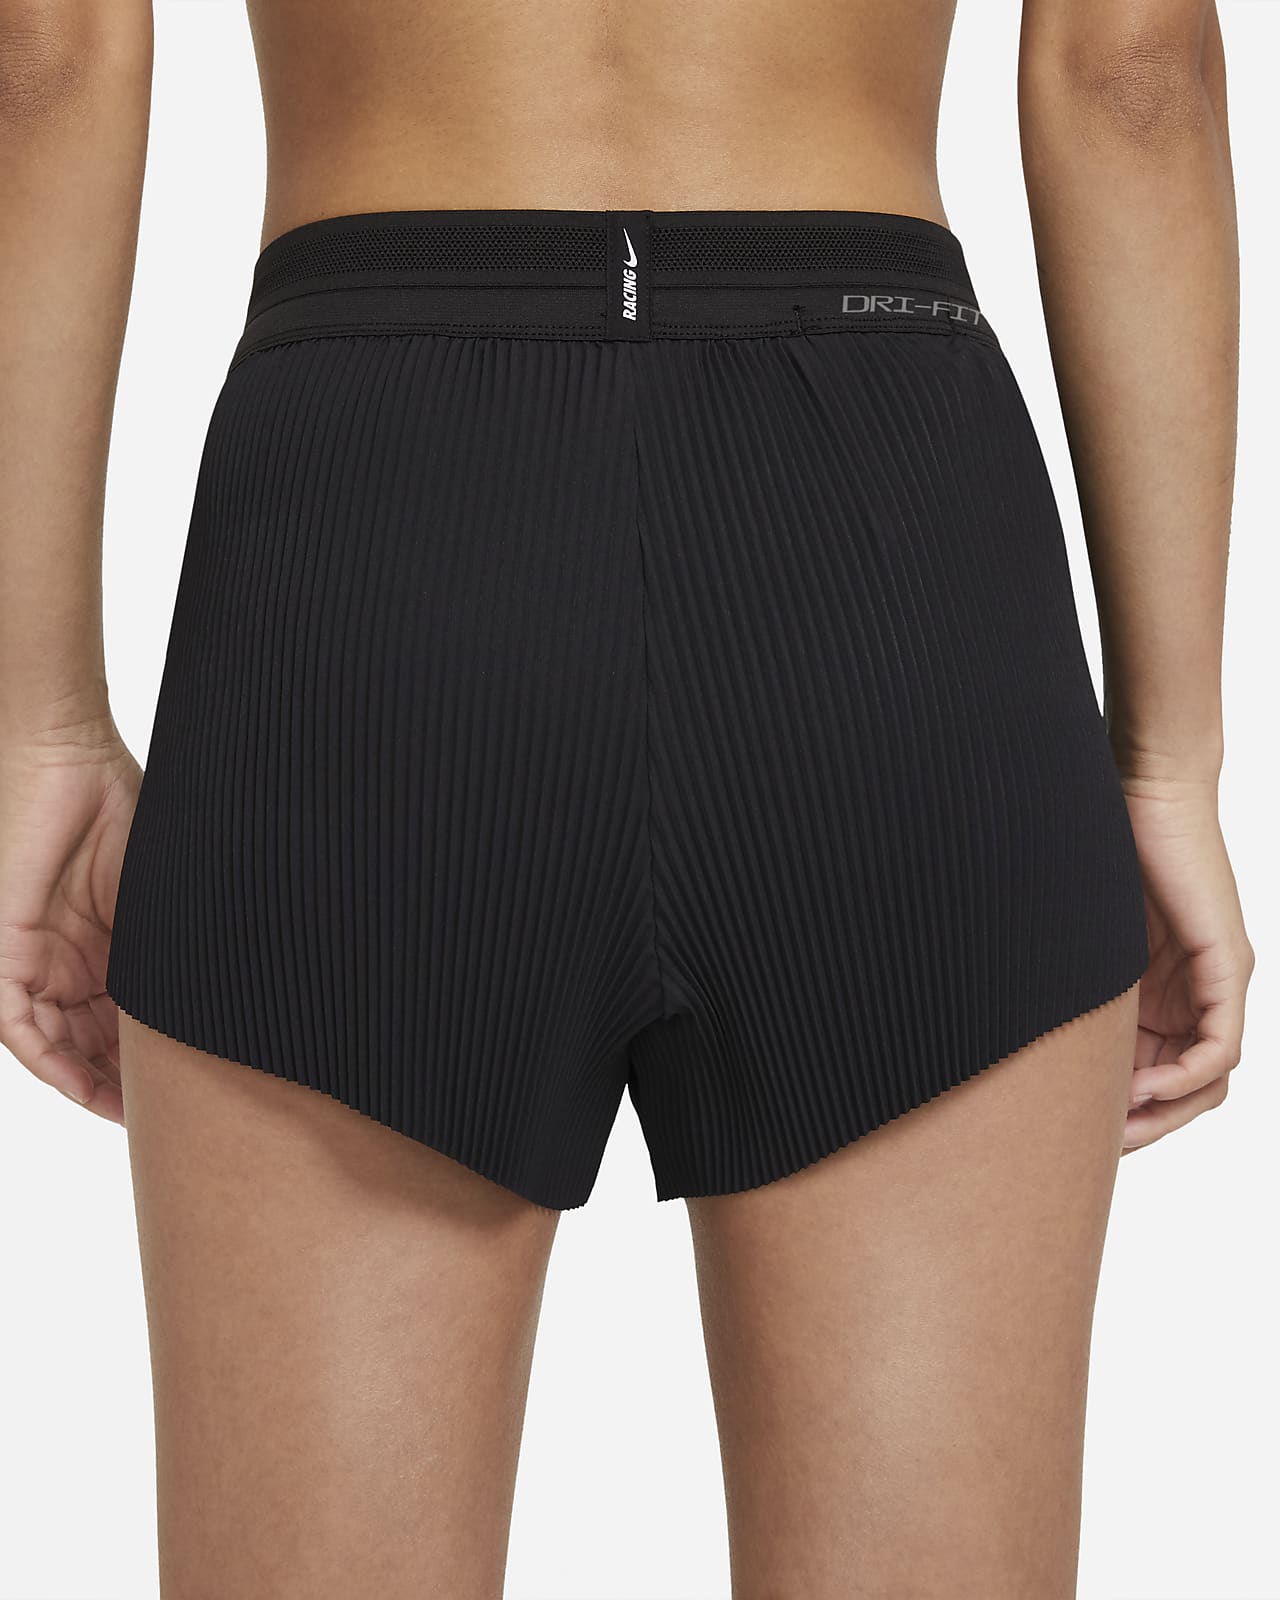 Runner's Guide to Wearing Compression Shorts. Nike IN